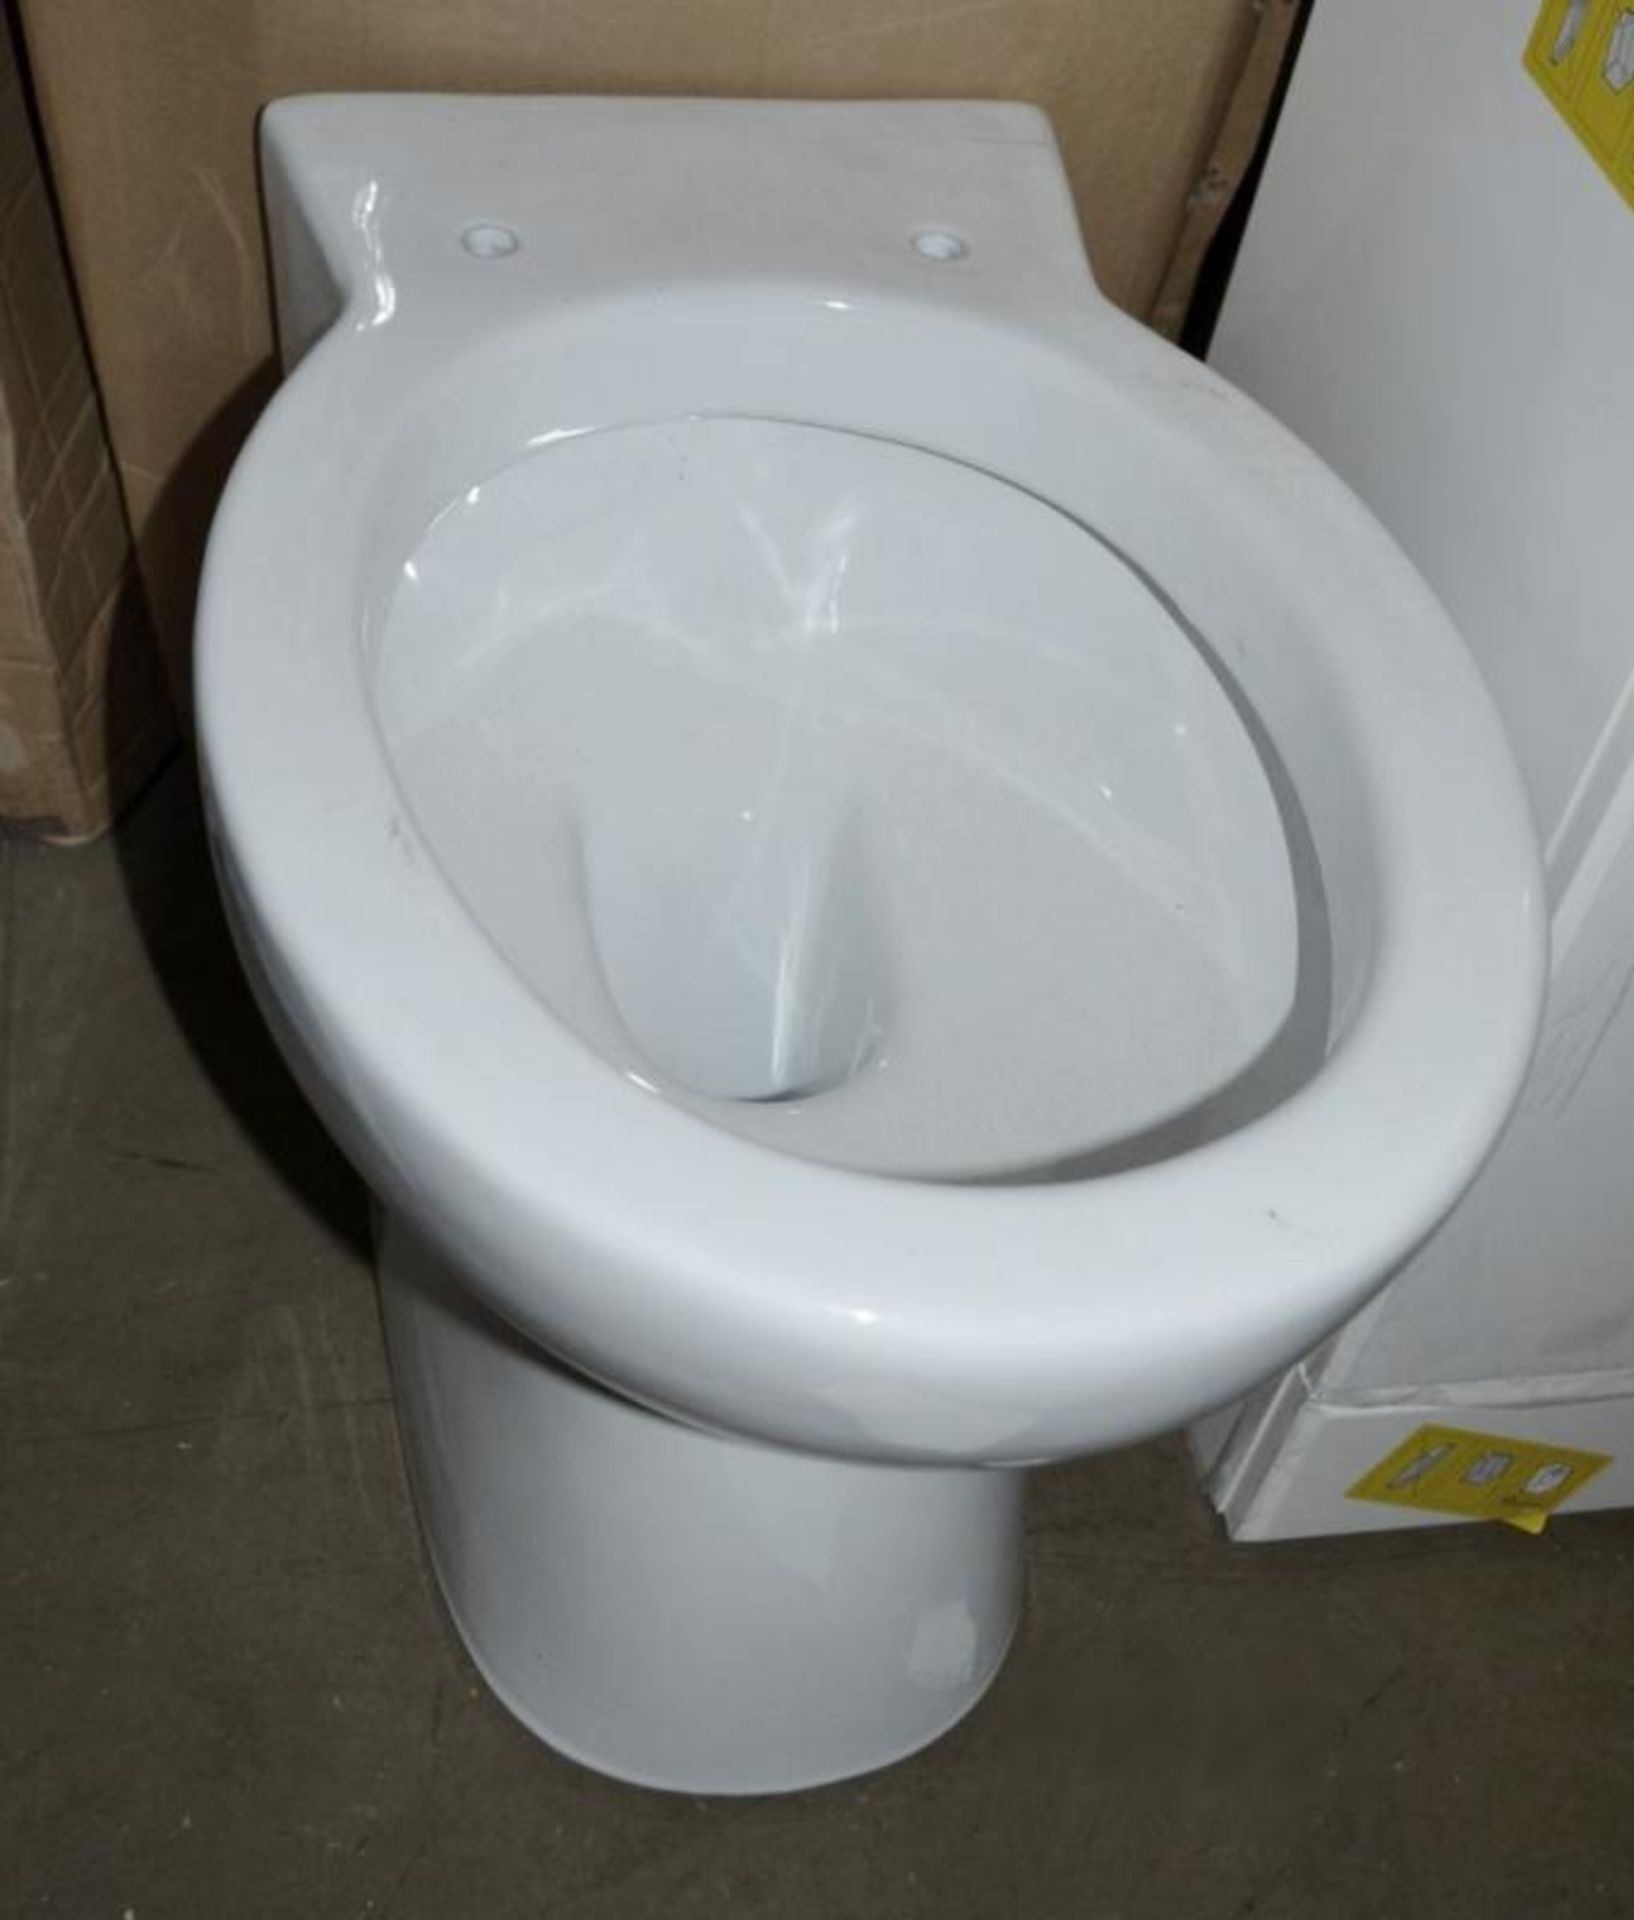 1 x Clarity Back To The Wall Toilet Pan - New / Unused Stock - CL269 - Ref MT765 - Image 2 of 3